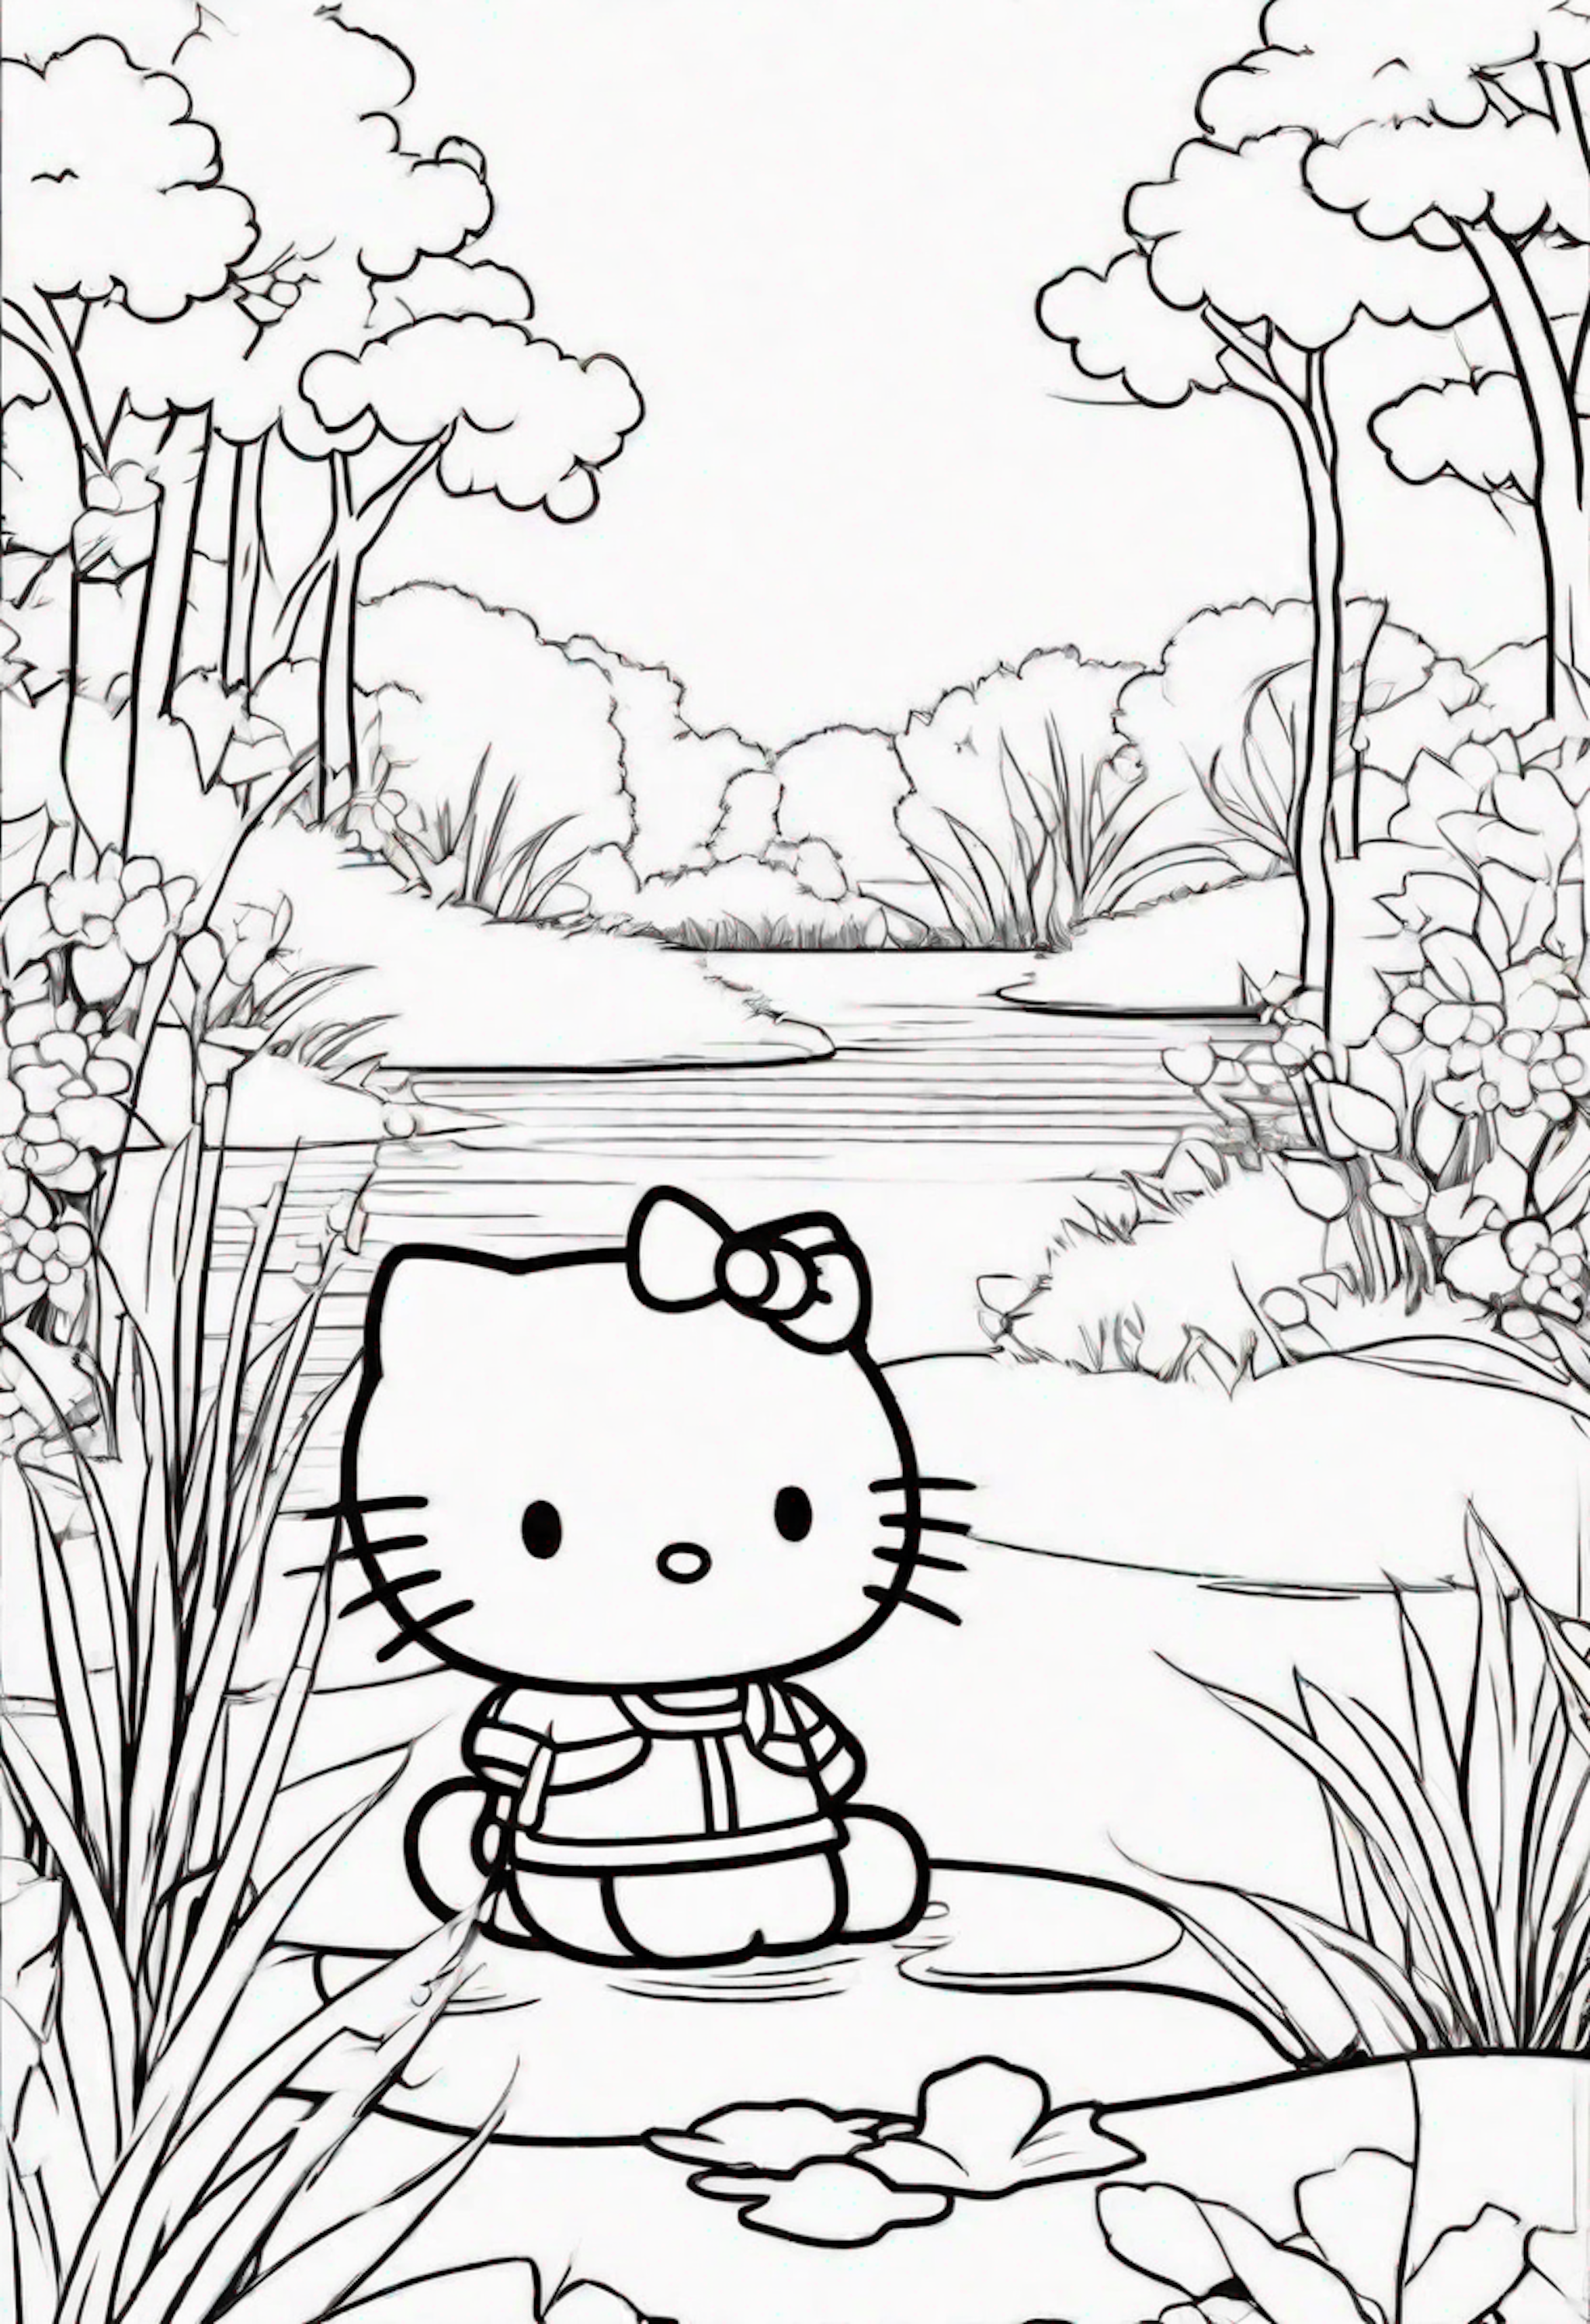 A coloring page for 2 Hello Kitty coloring pages